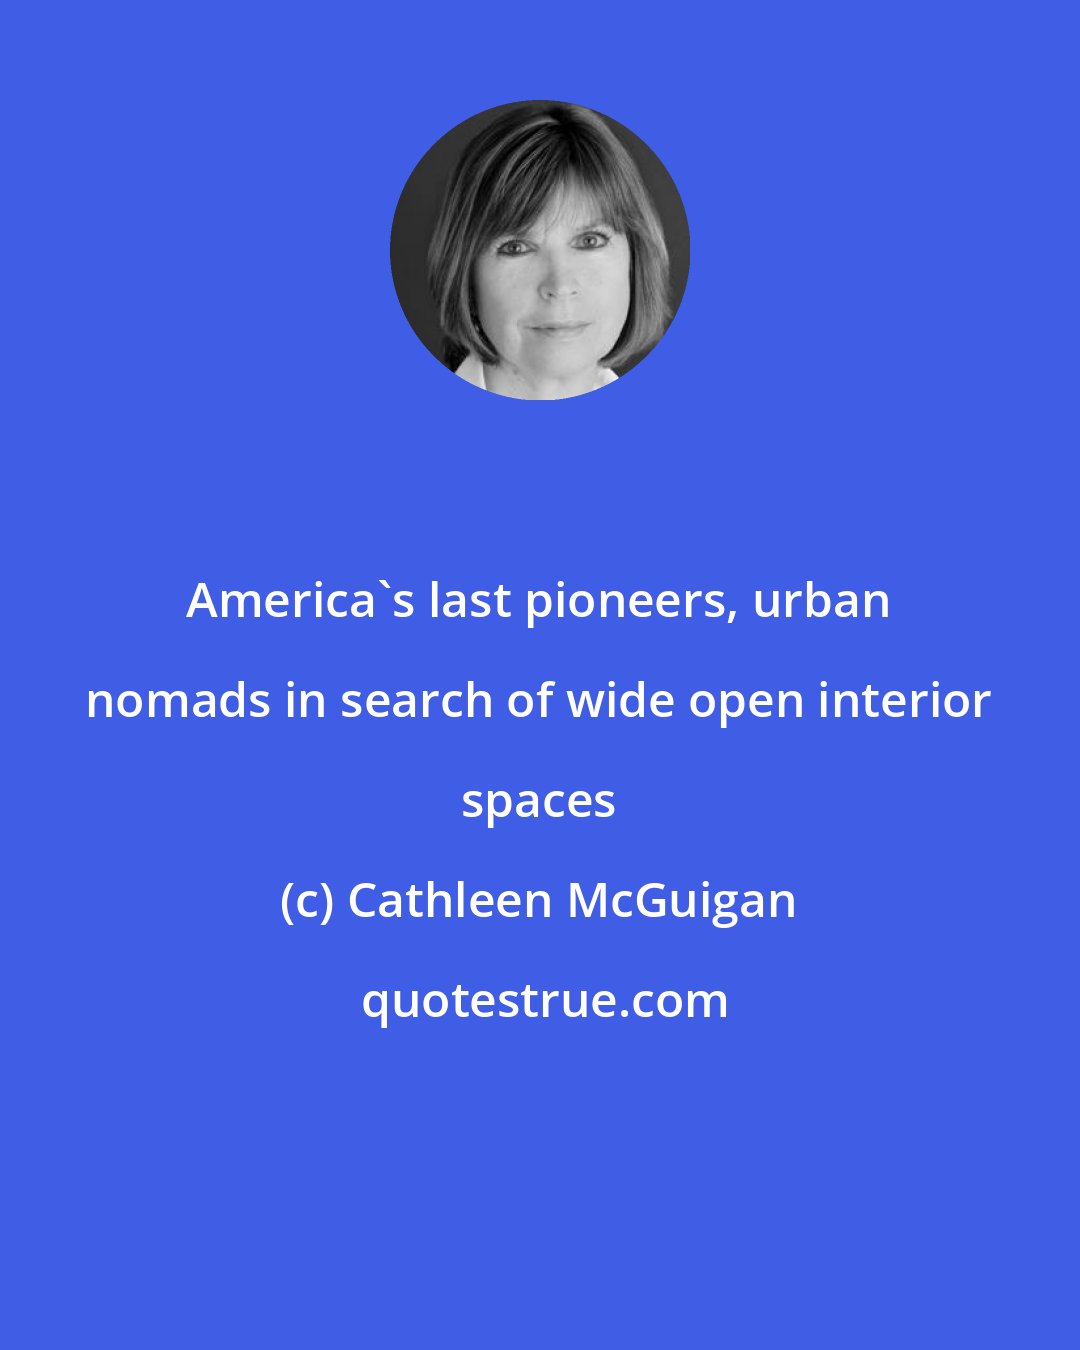 Cathleen McGuigan: America's last pioneers, urban nomads in search of wide open interior spaces